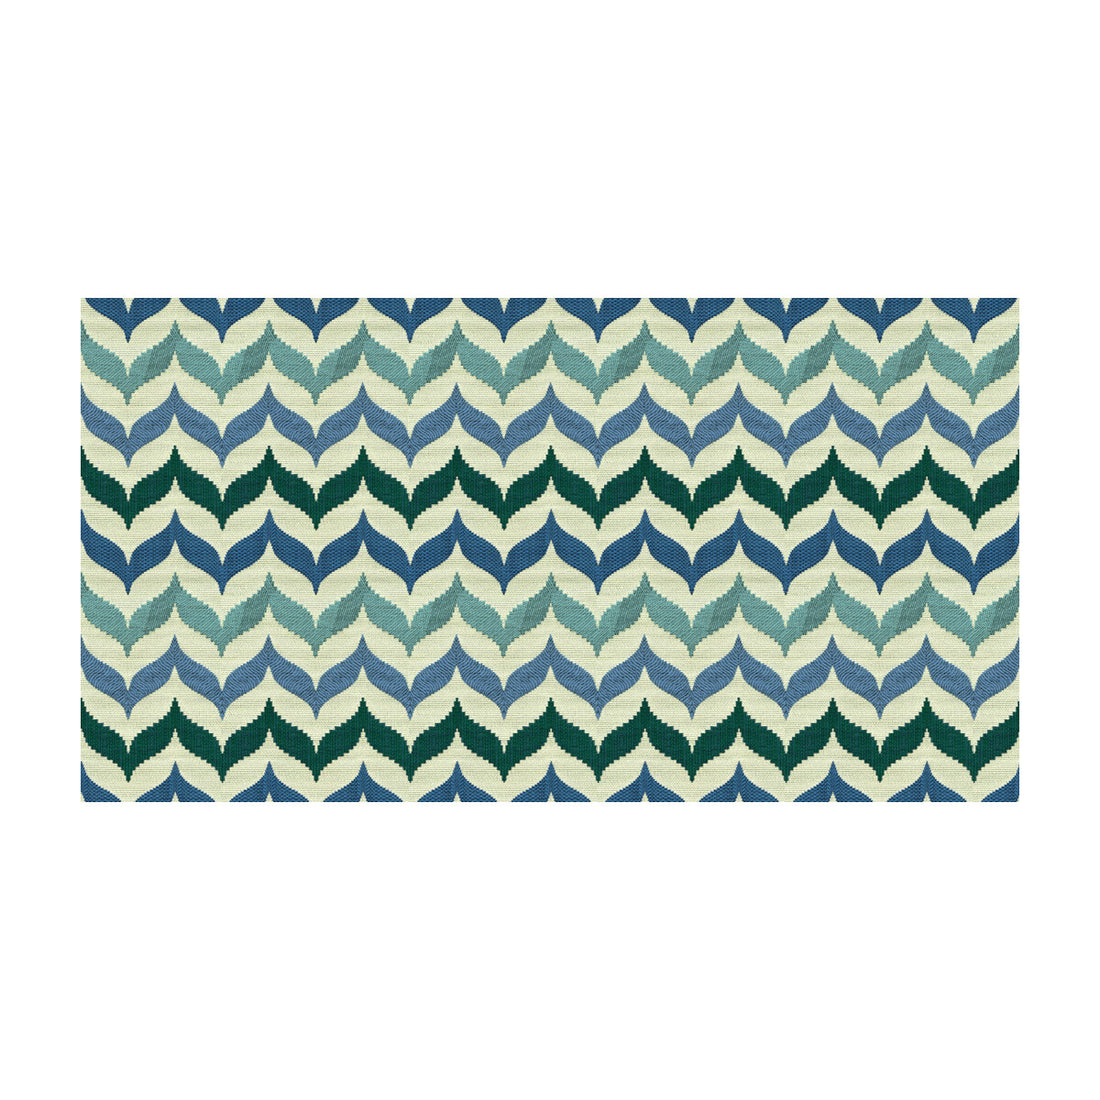 Andora fabric in mermaid color - pattern 33640.516.0 - by Kravet Contract in the Jonathan Adler Clarity collection